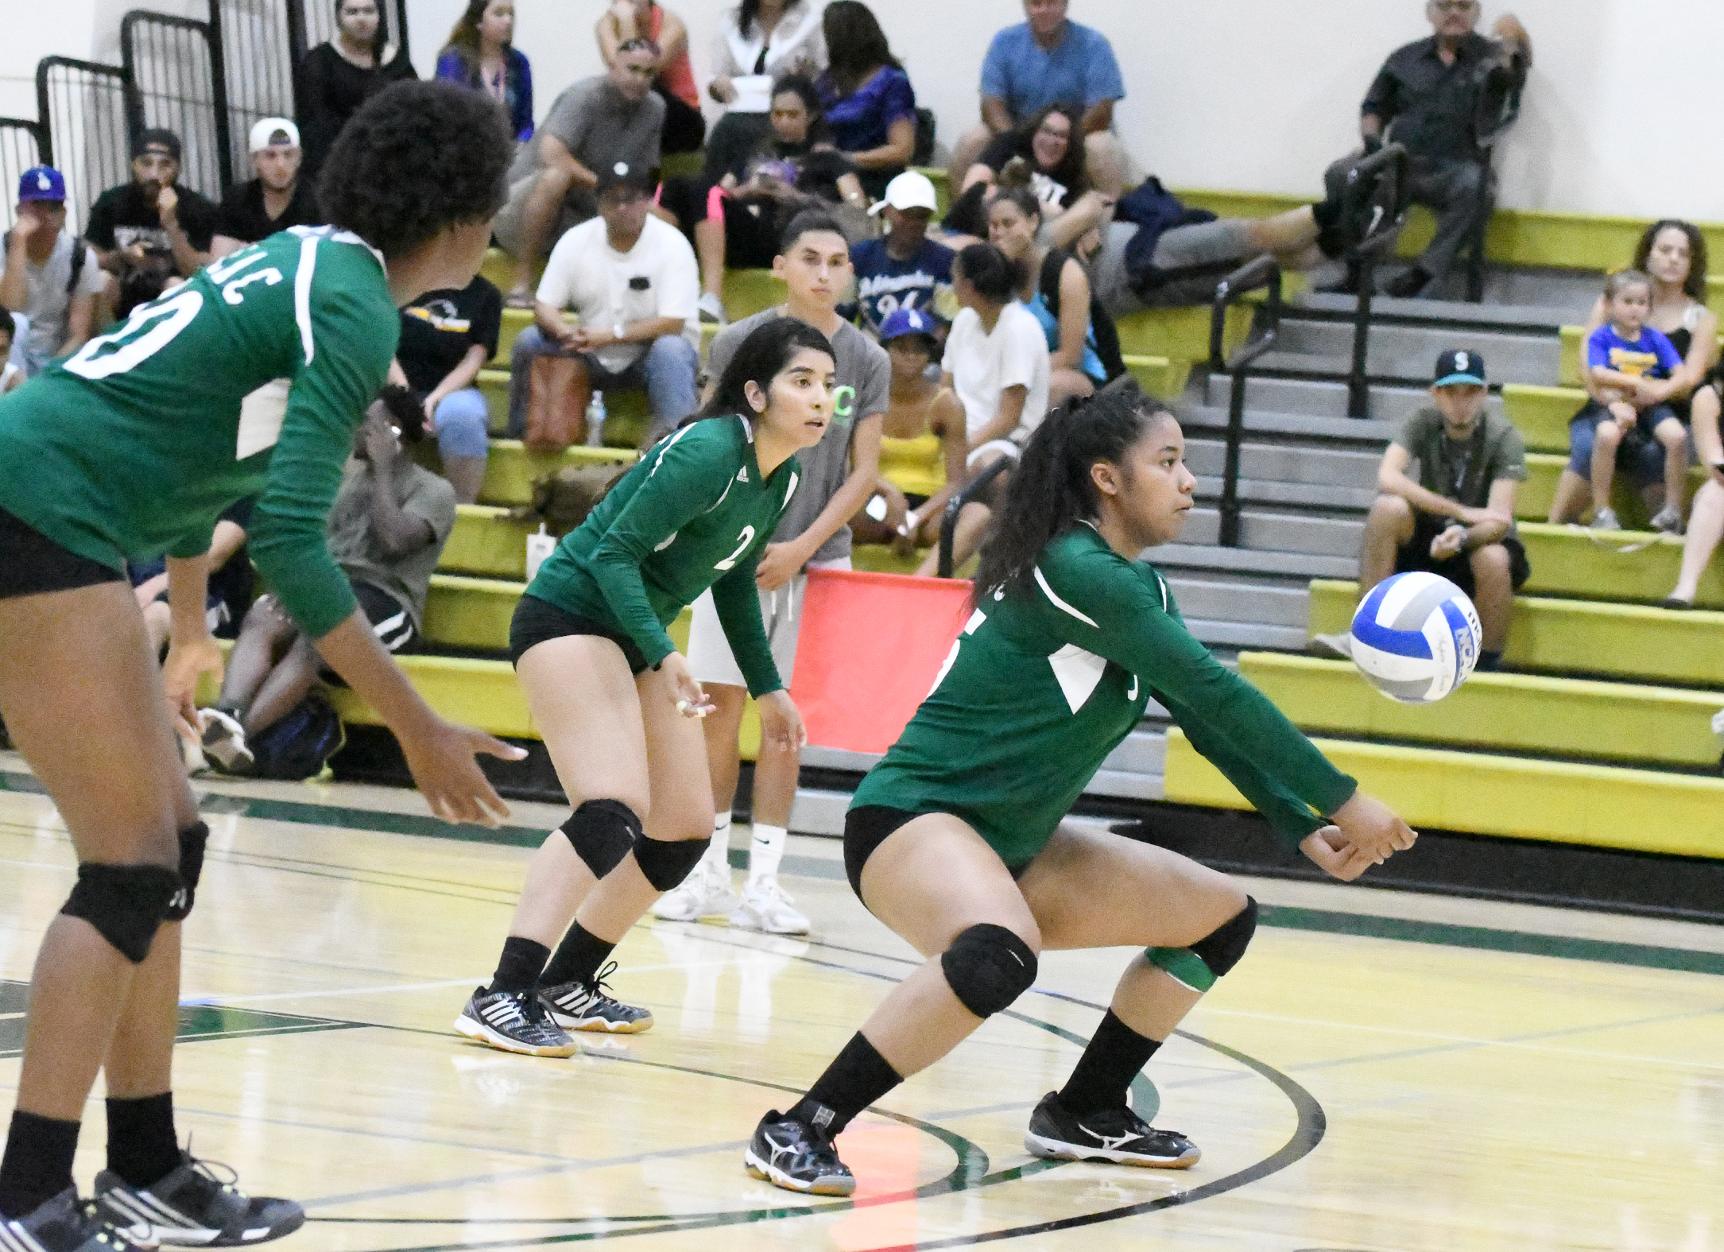 East Los Angeles College sophomore outside hitter Angela Wade gets low and digs the ball as Huskies (from left) look on, freshman Esther Duru and sophomore Sophia Leon. (Photo by DeeDee Jackson)